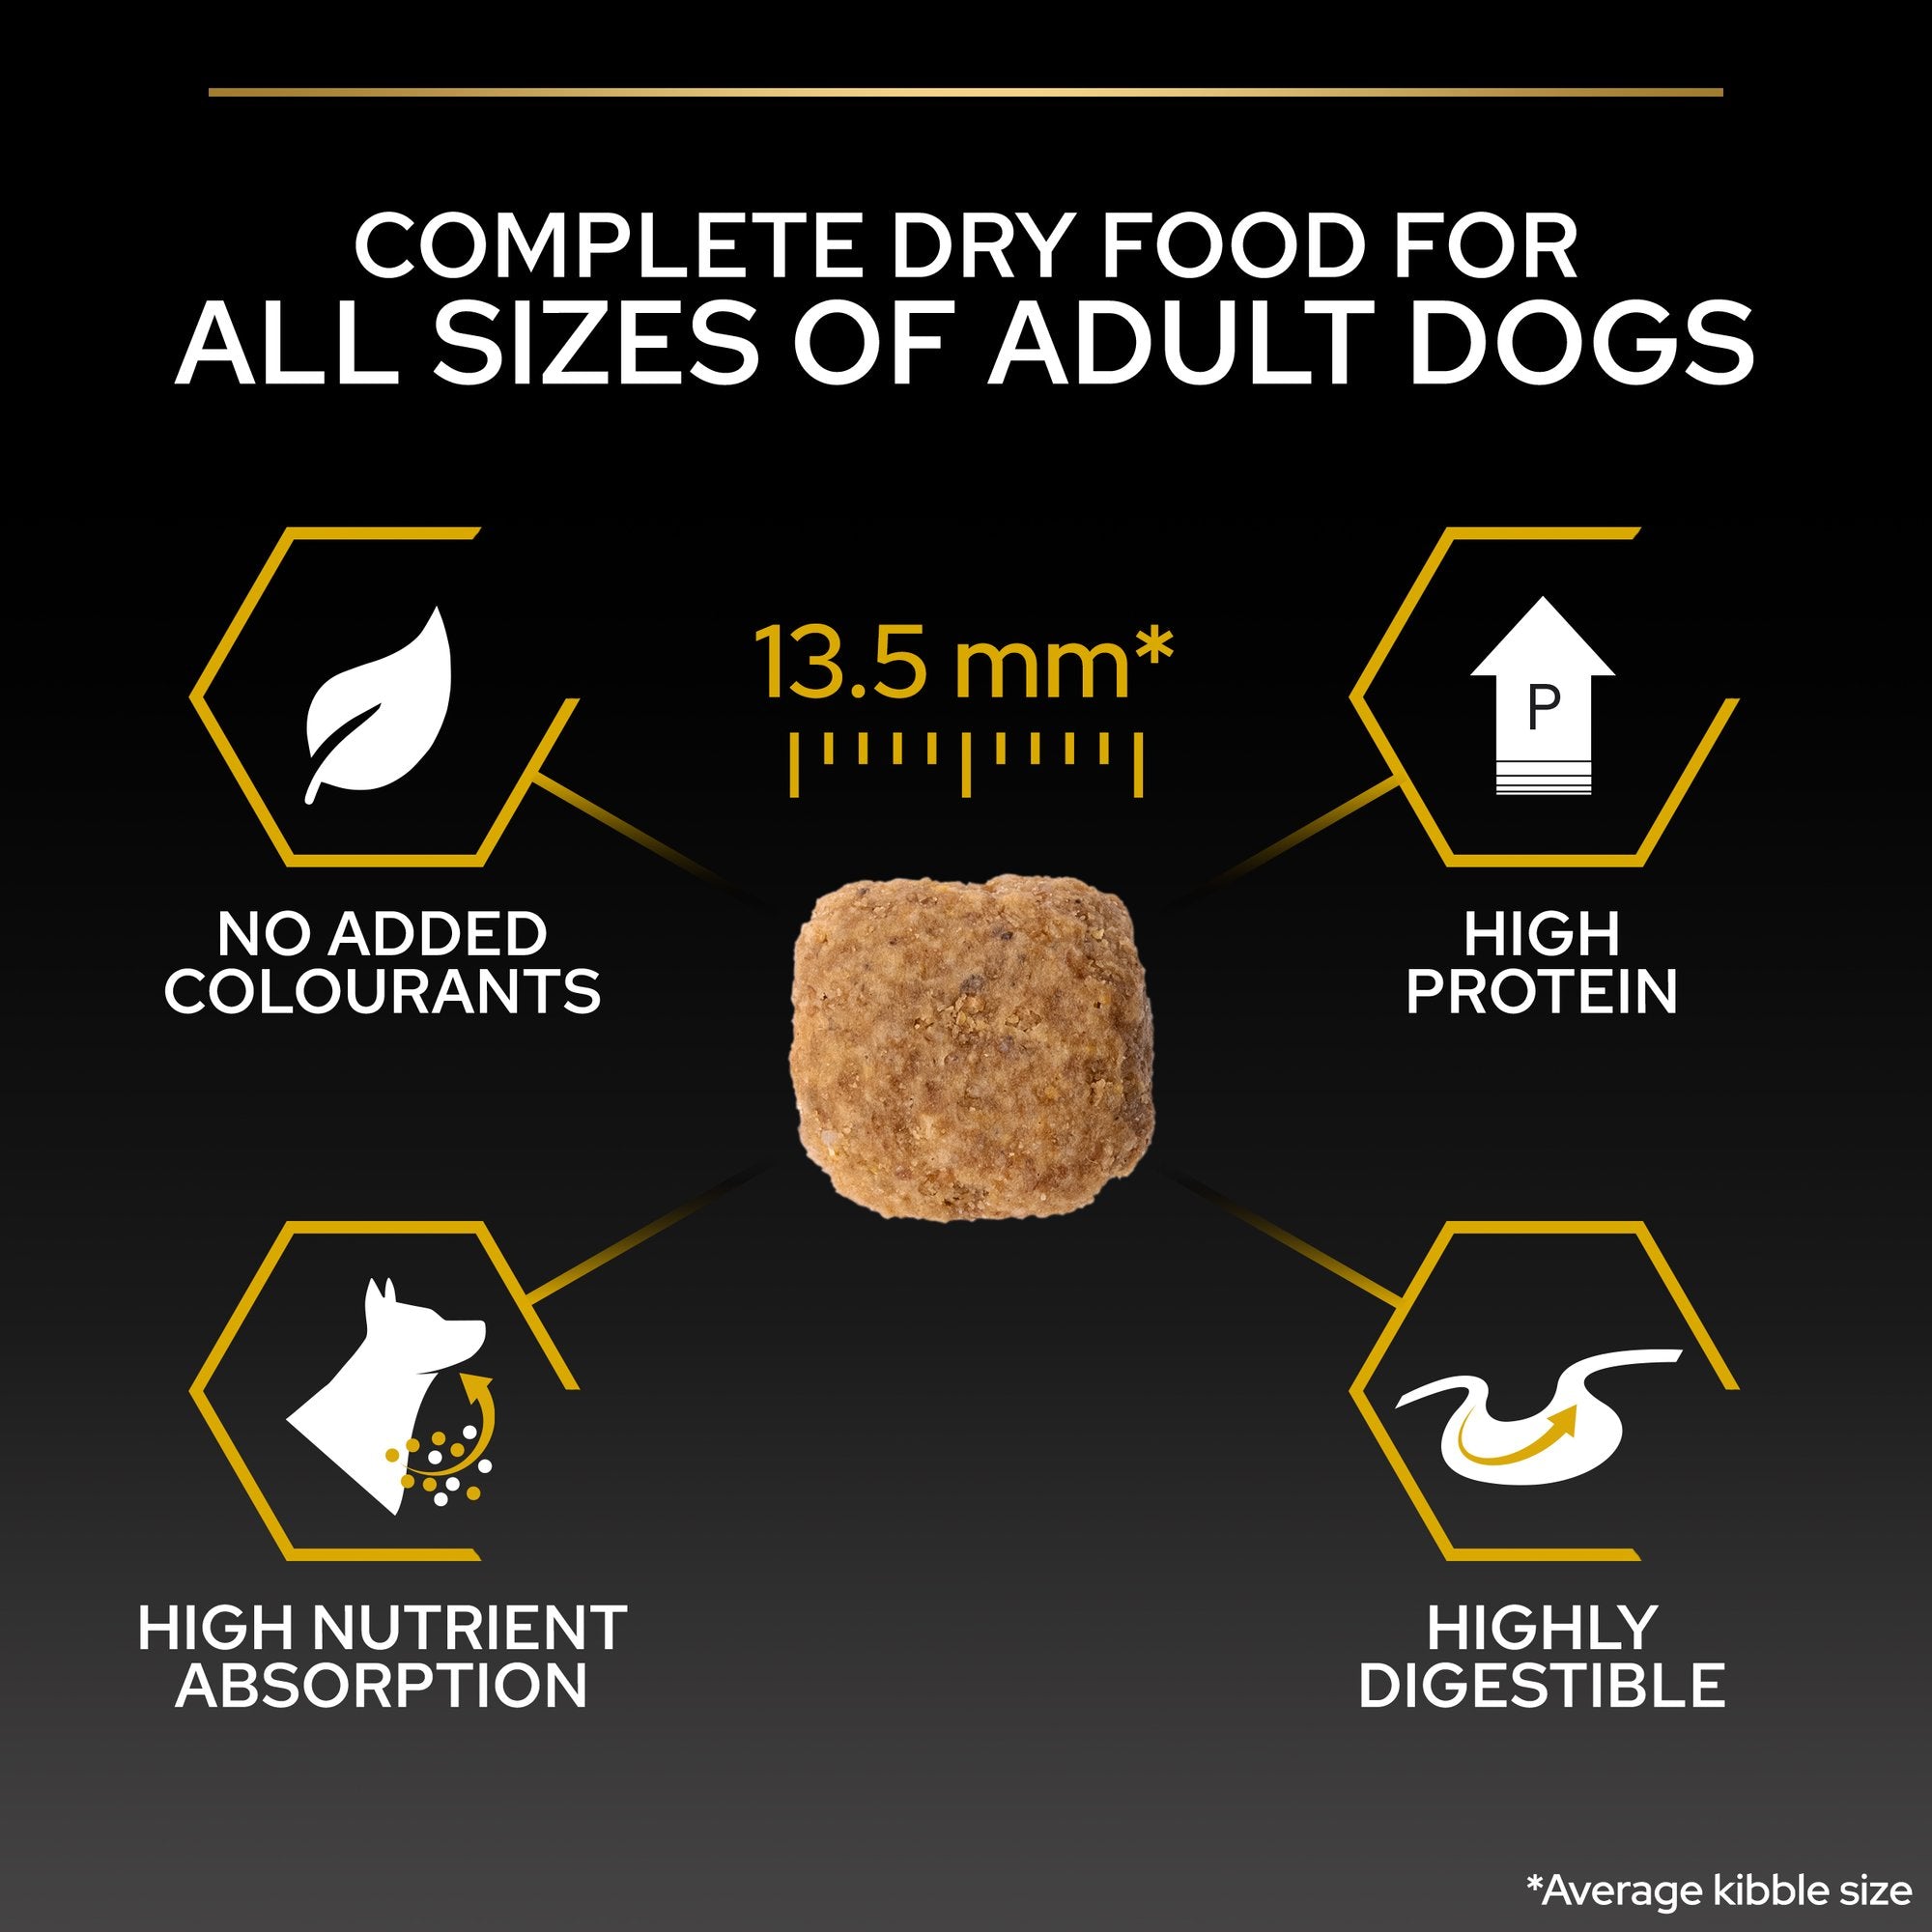 PURINA® Pro Plan® All Sizes Adult Light / Sterilised with OPTIWEIGHT®, Rich in Chicken Dry Dog Food - 3 KG